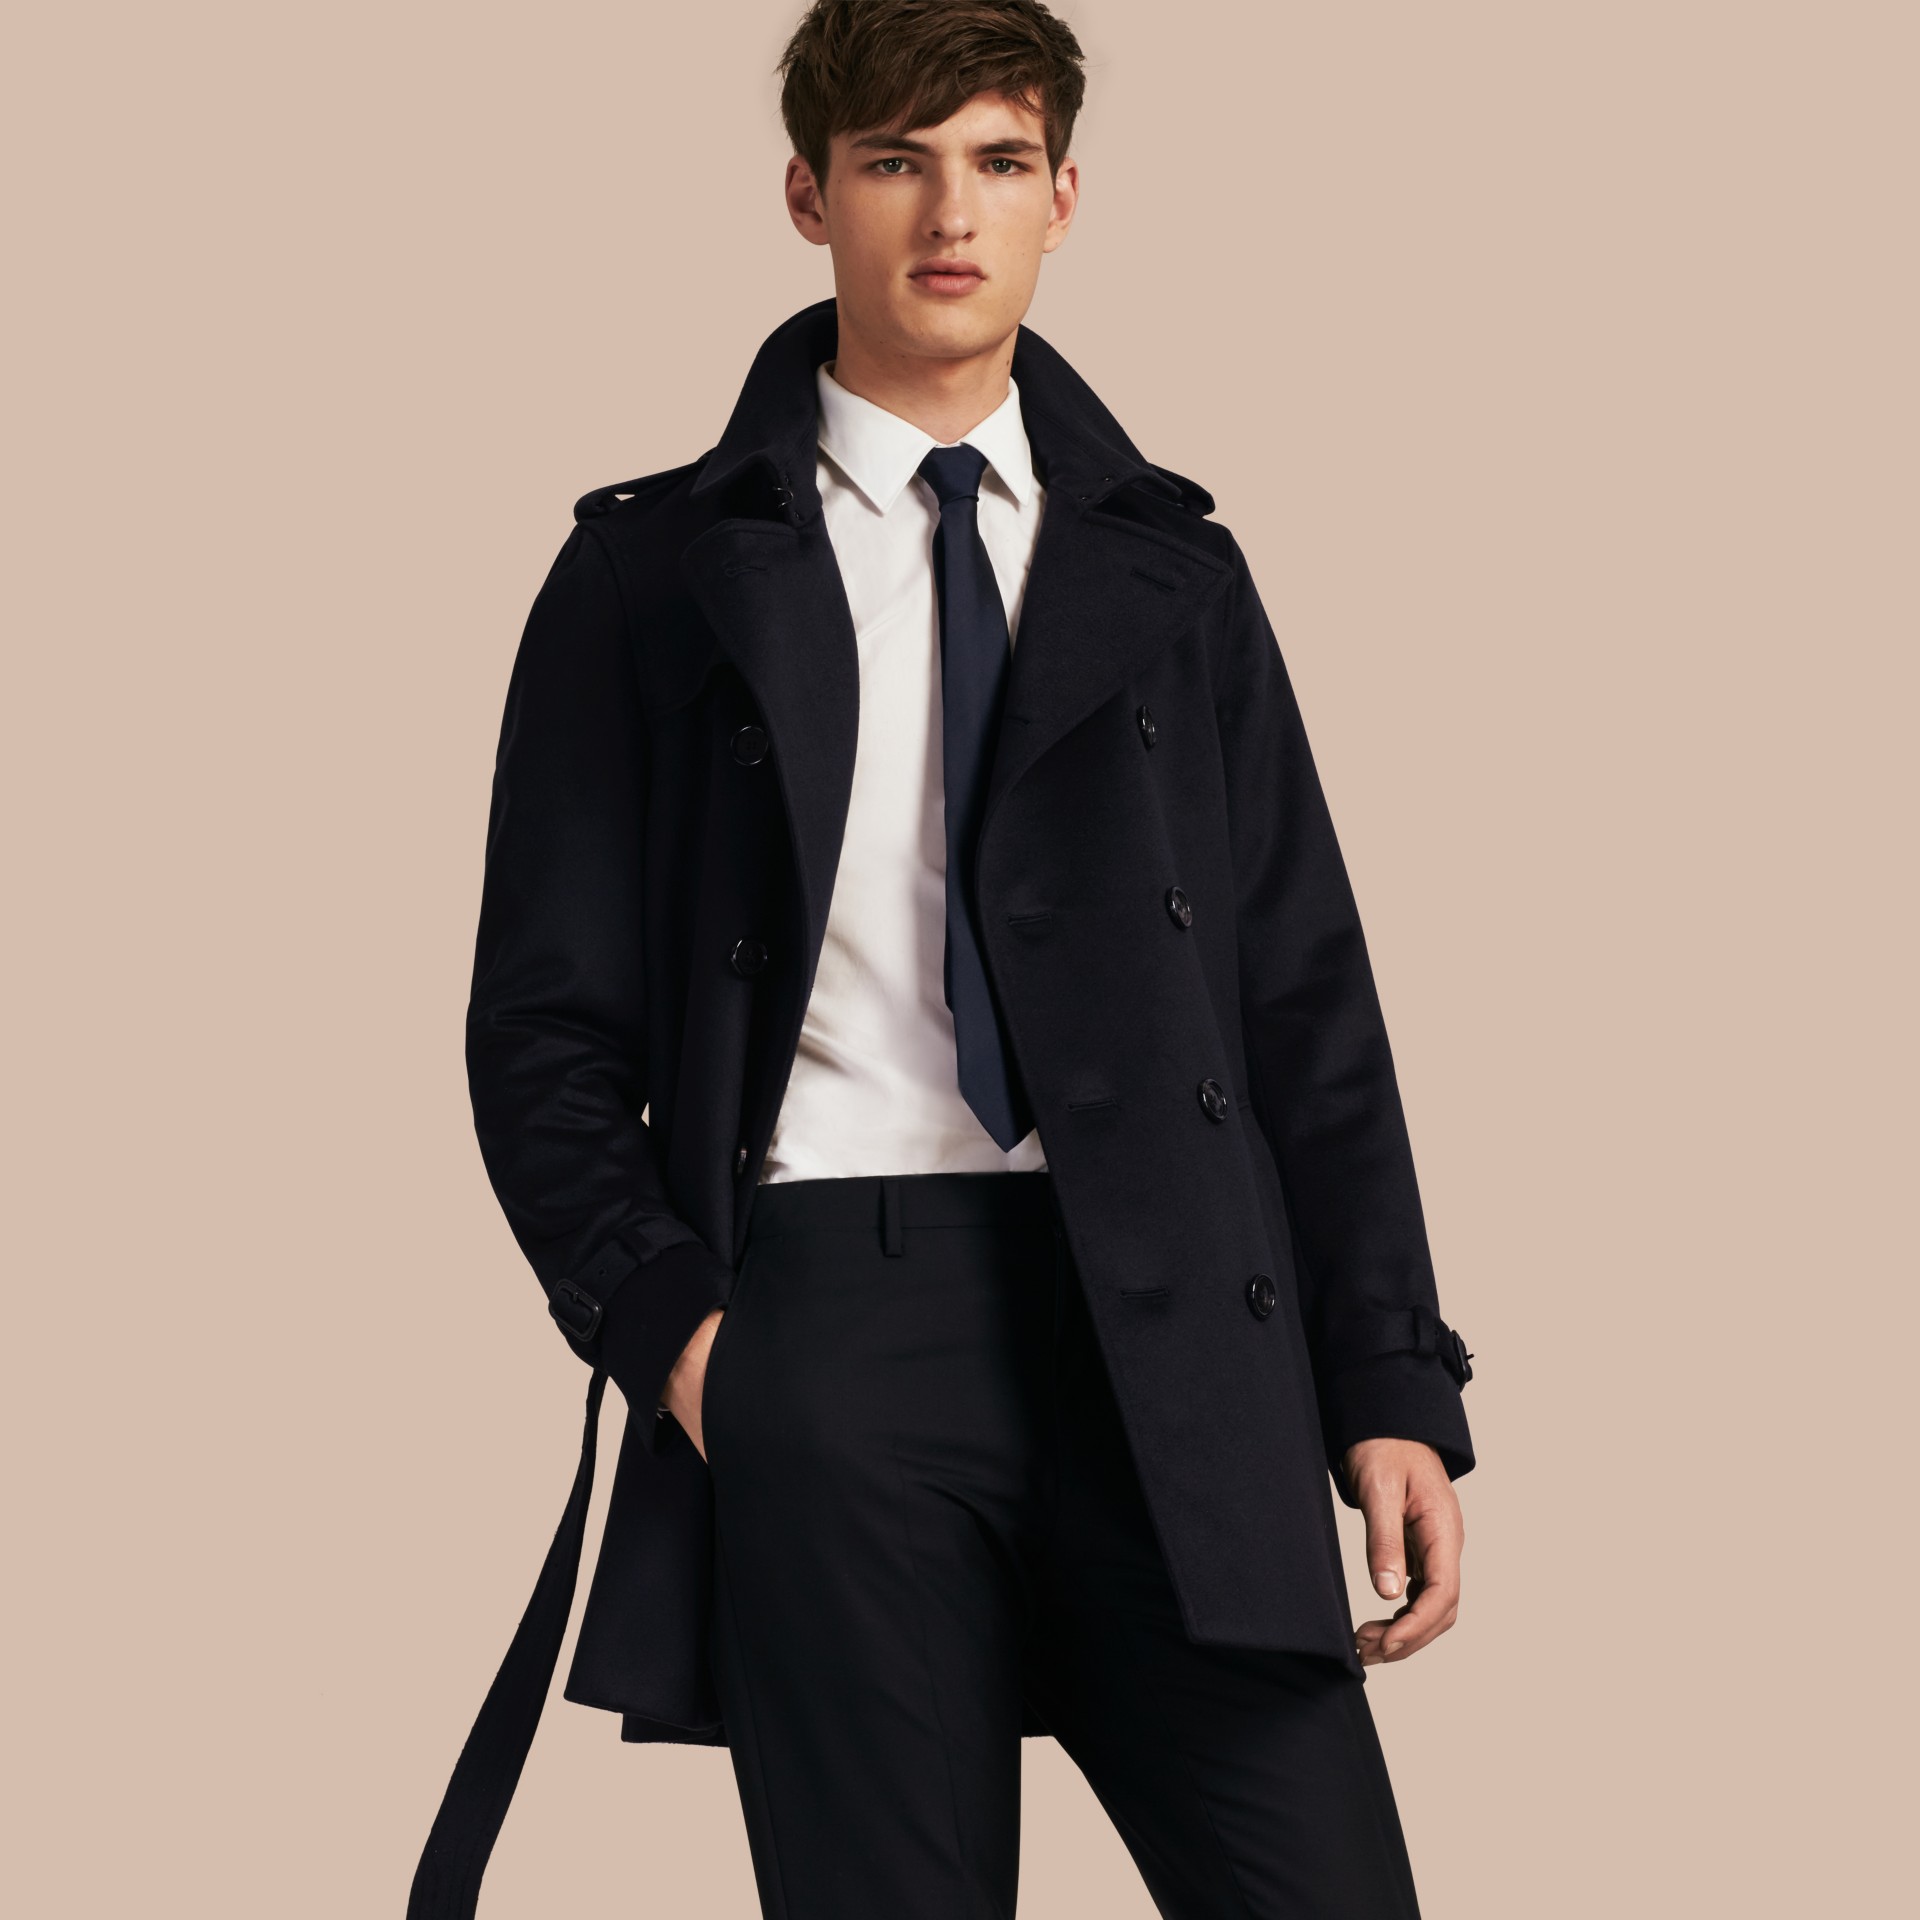 Cashmere Trench Coat in Navy - Men | Burberry United States